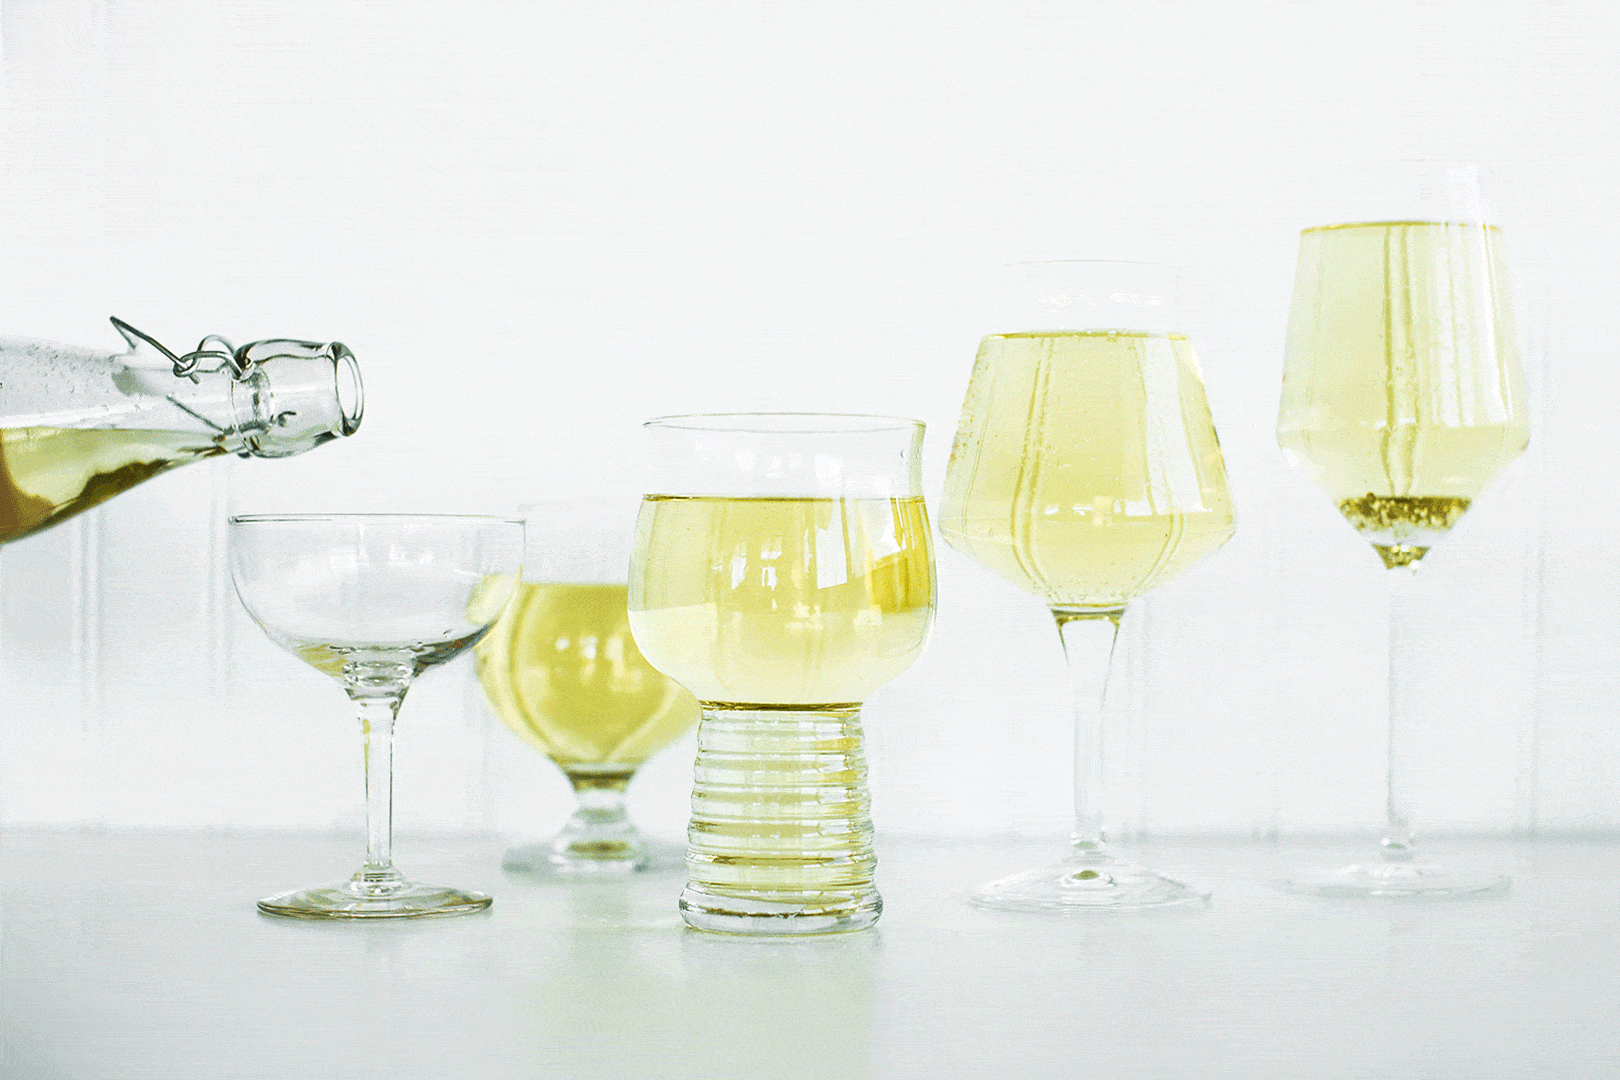 Types of Drinkware for Beer, Wine, and Cocktail